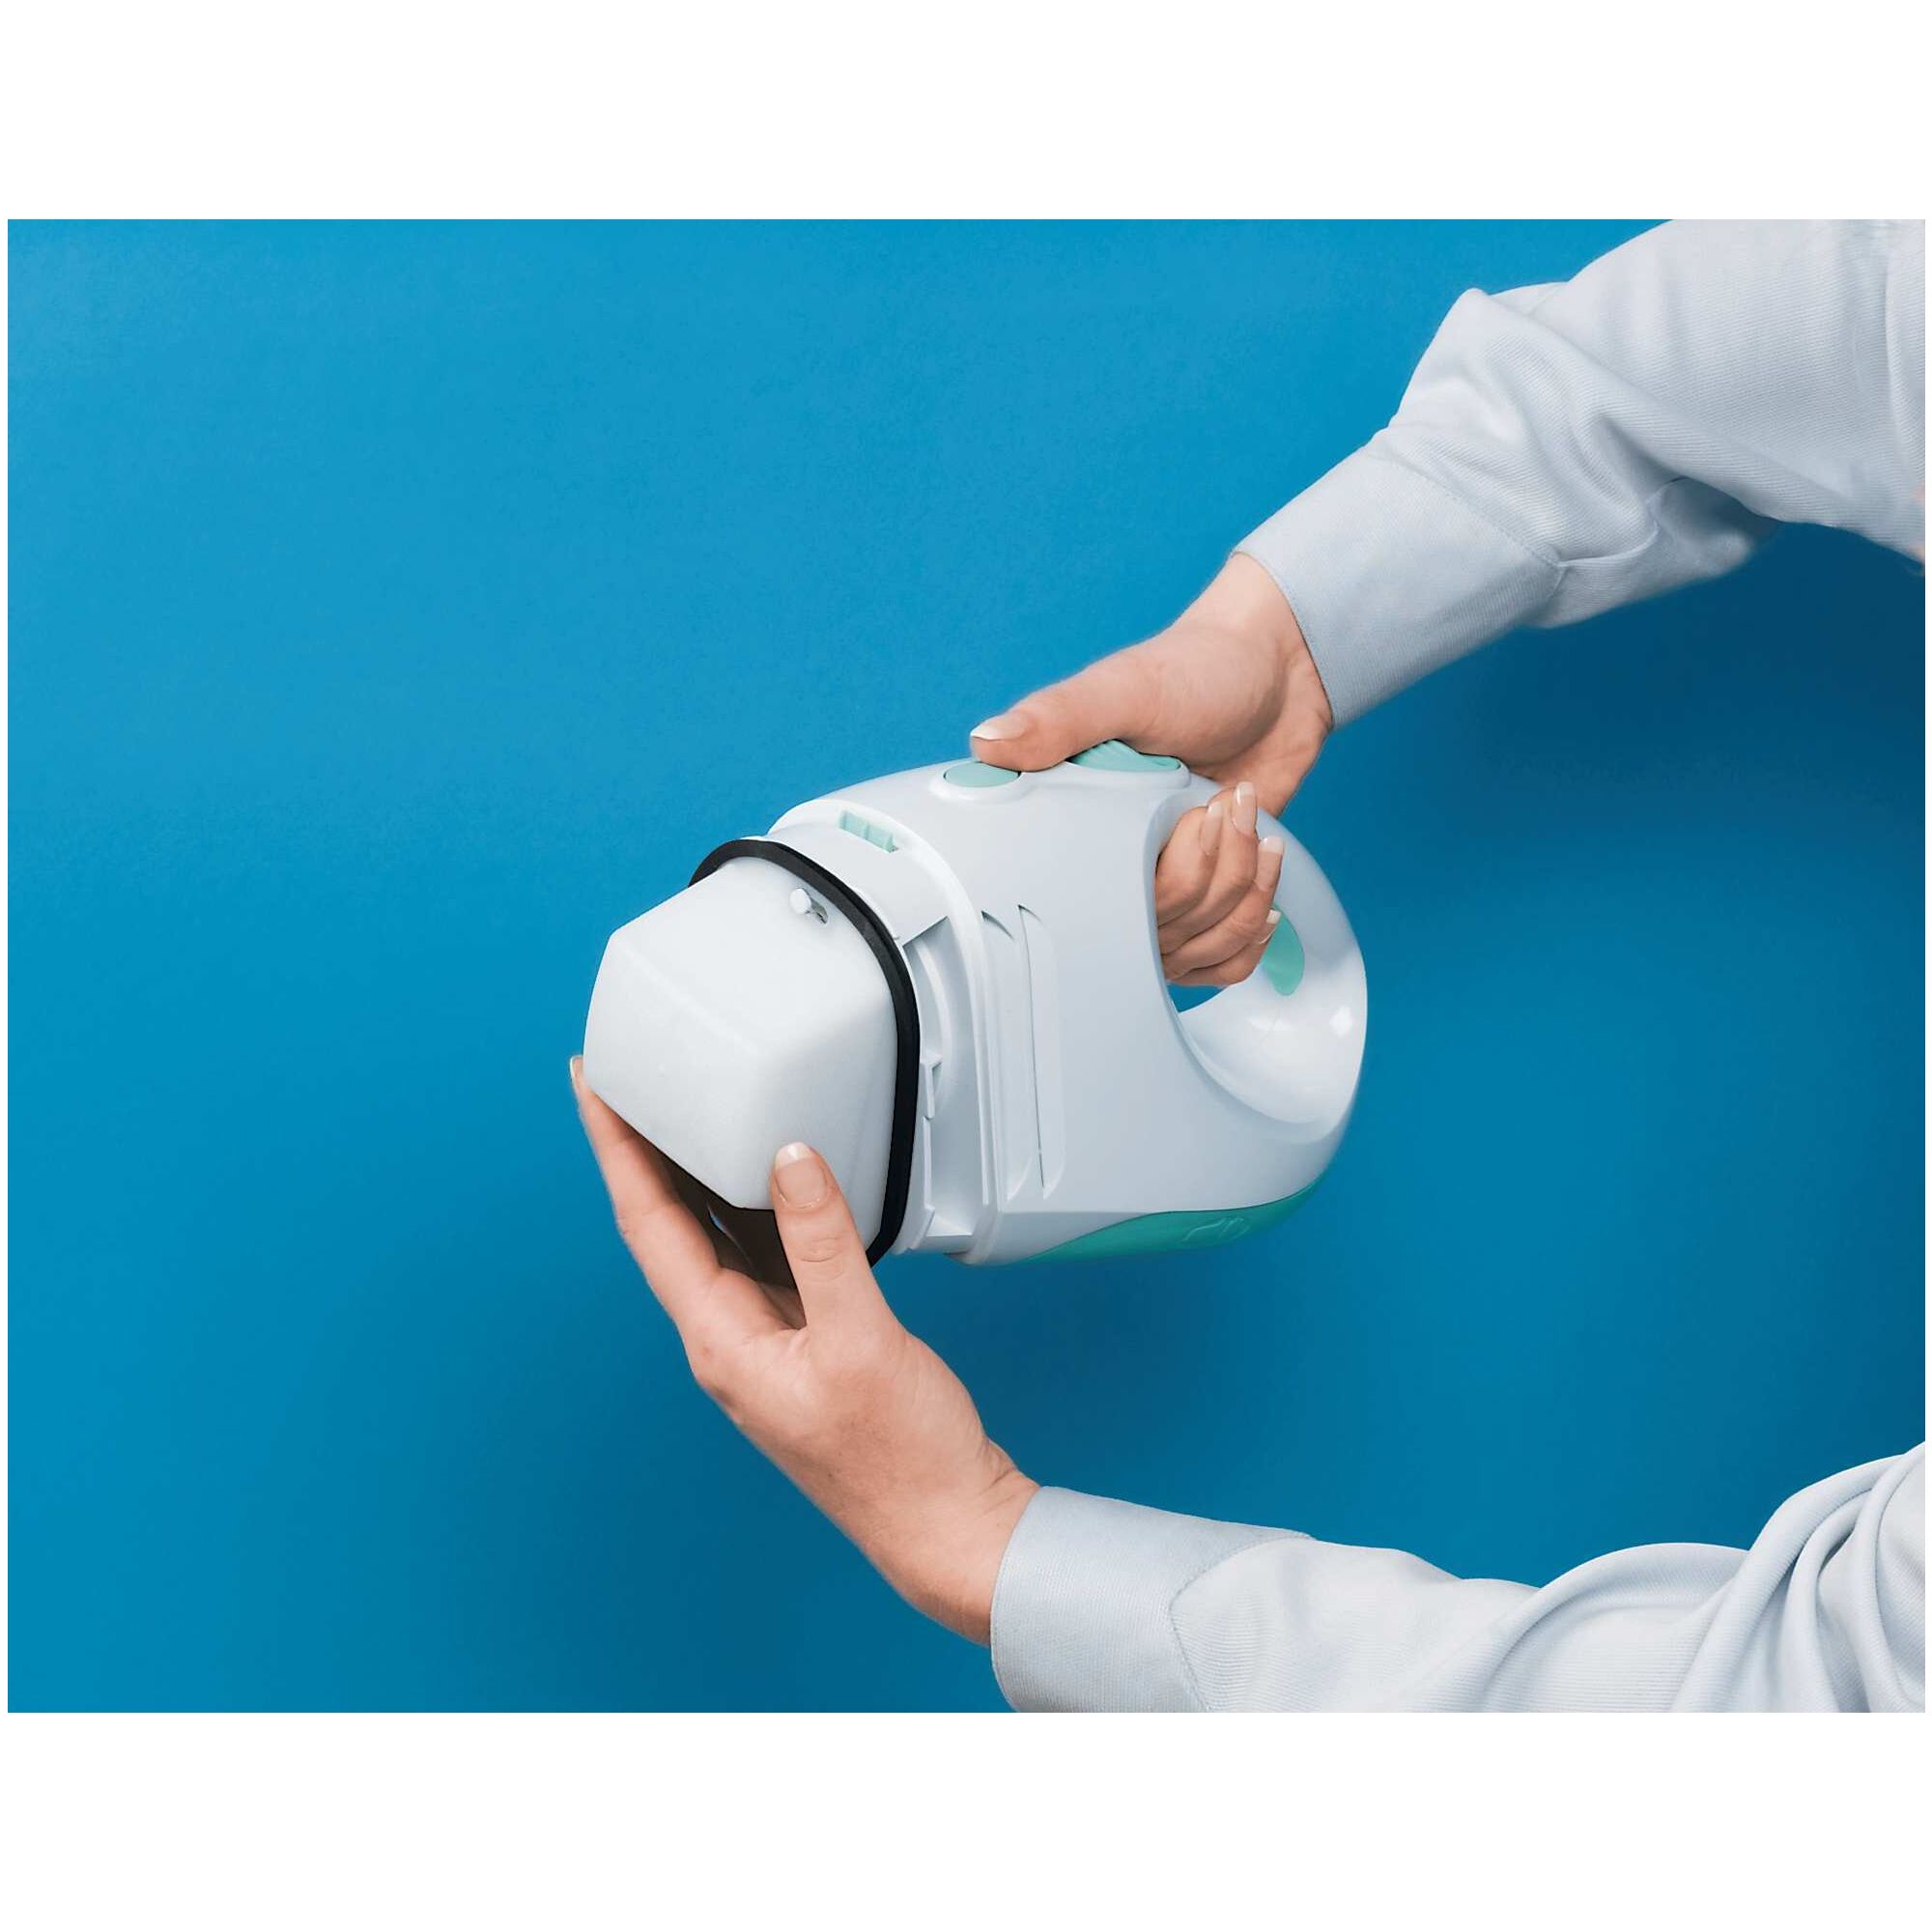 Convenient filter replacement feature of dustbuster Hand Vacuum Replacement Filter.